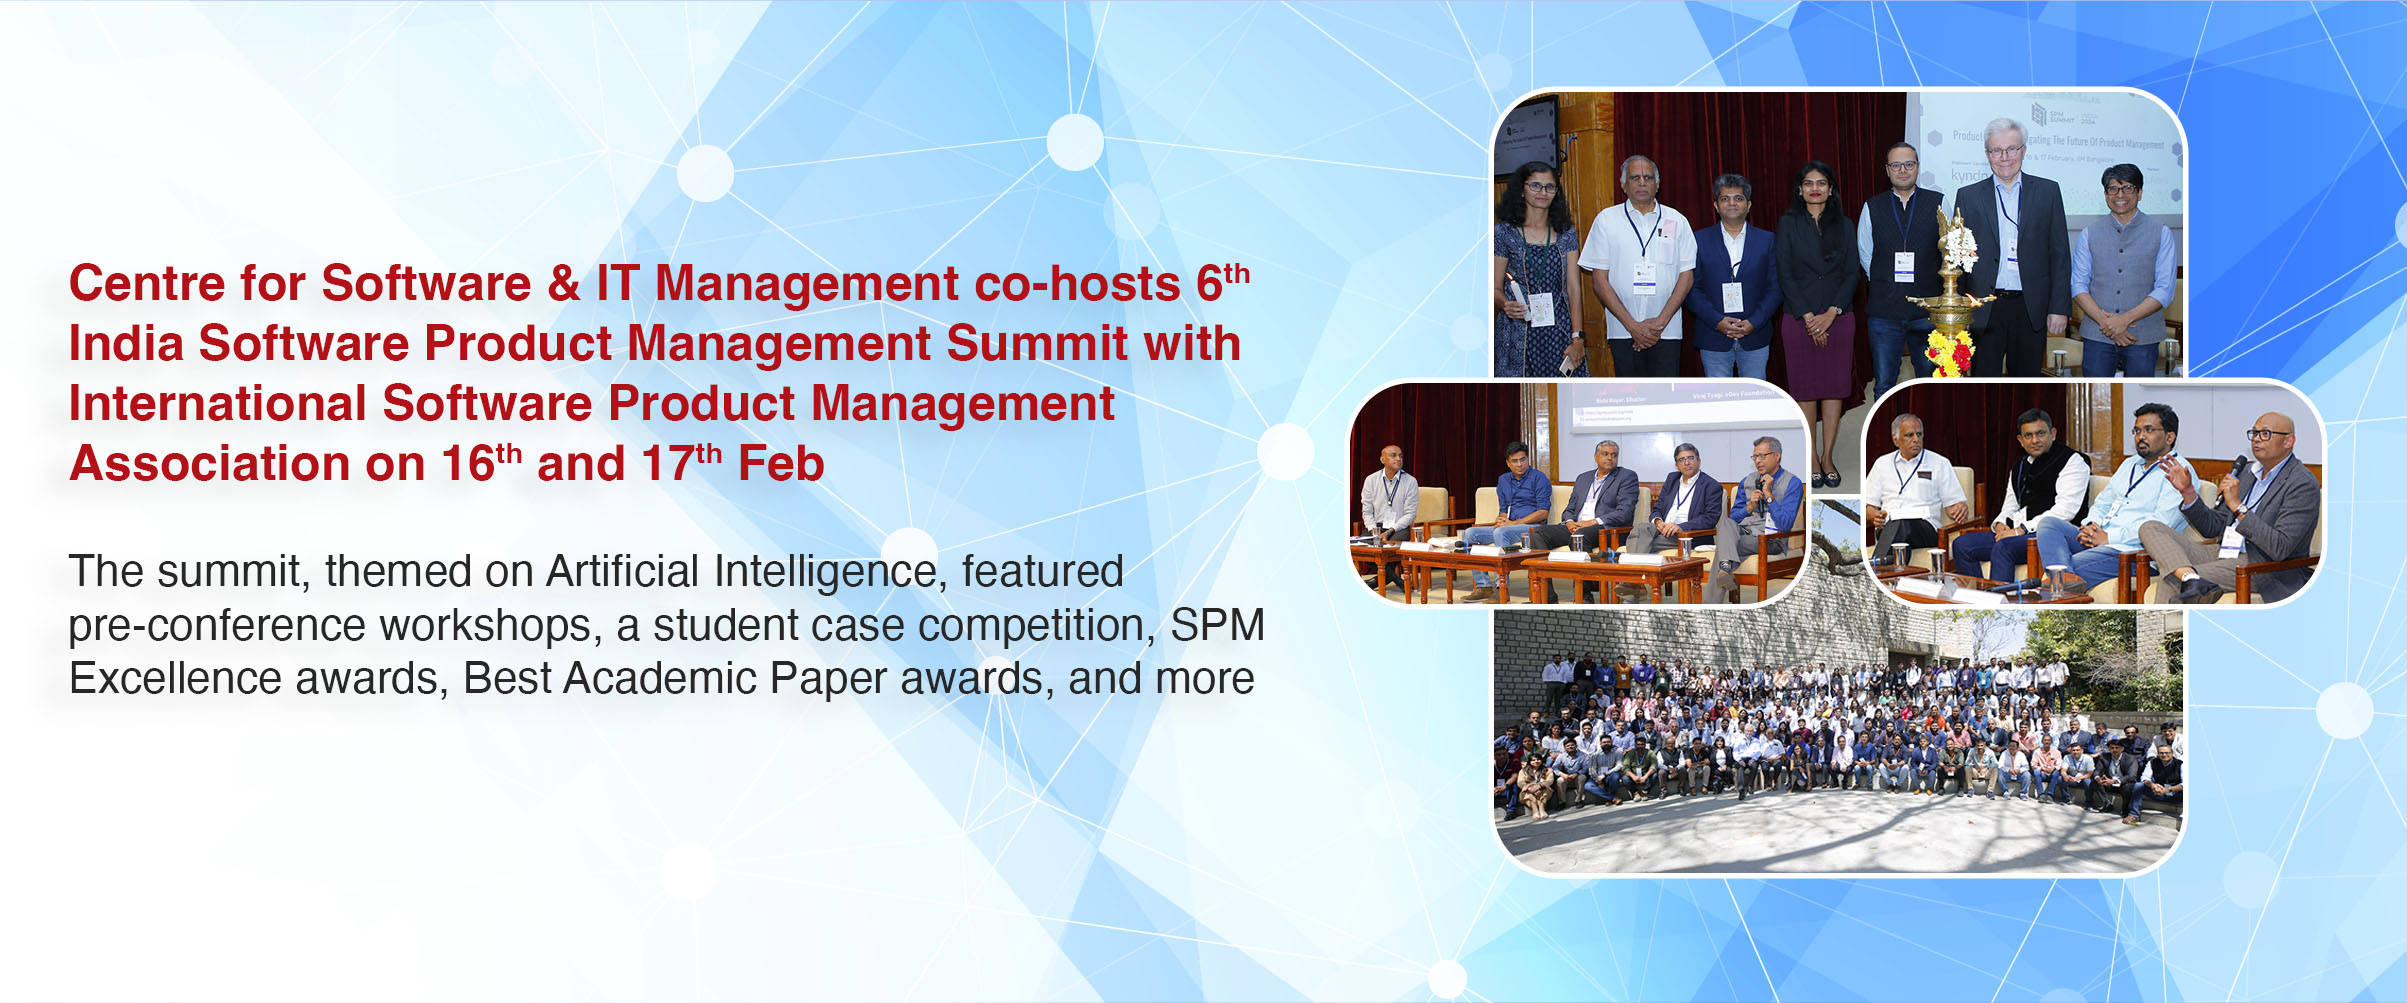 Centre for Software & IT Management co-hosts 6th India Software Product Management Summit with International Software Product Management Association on 16th and 17th Feb 